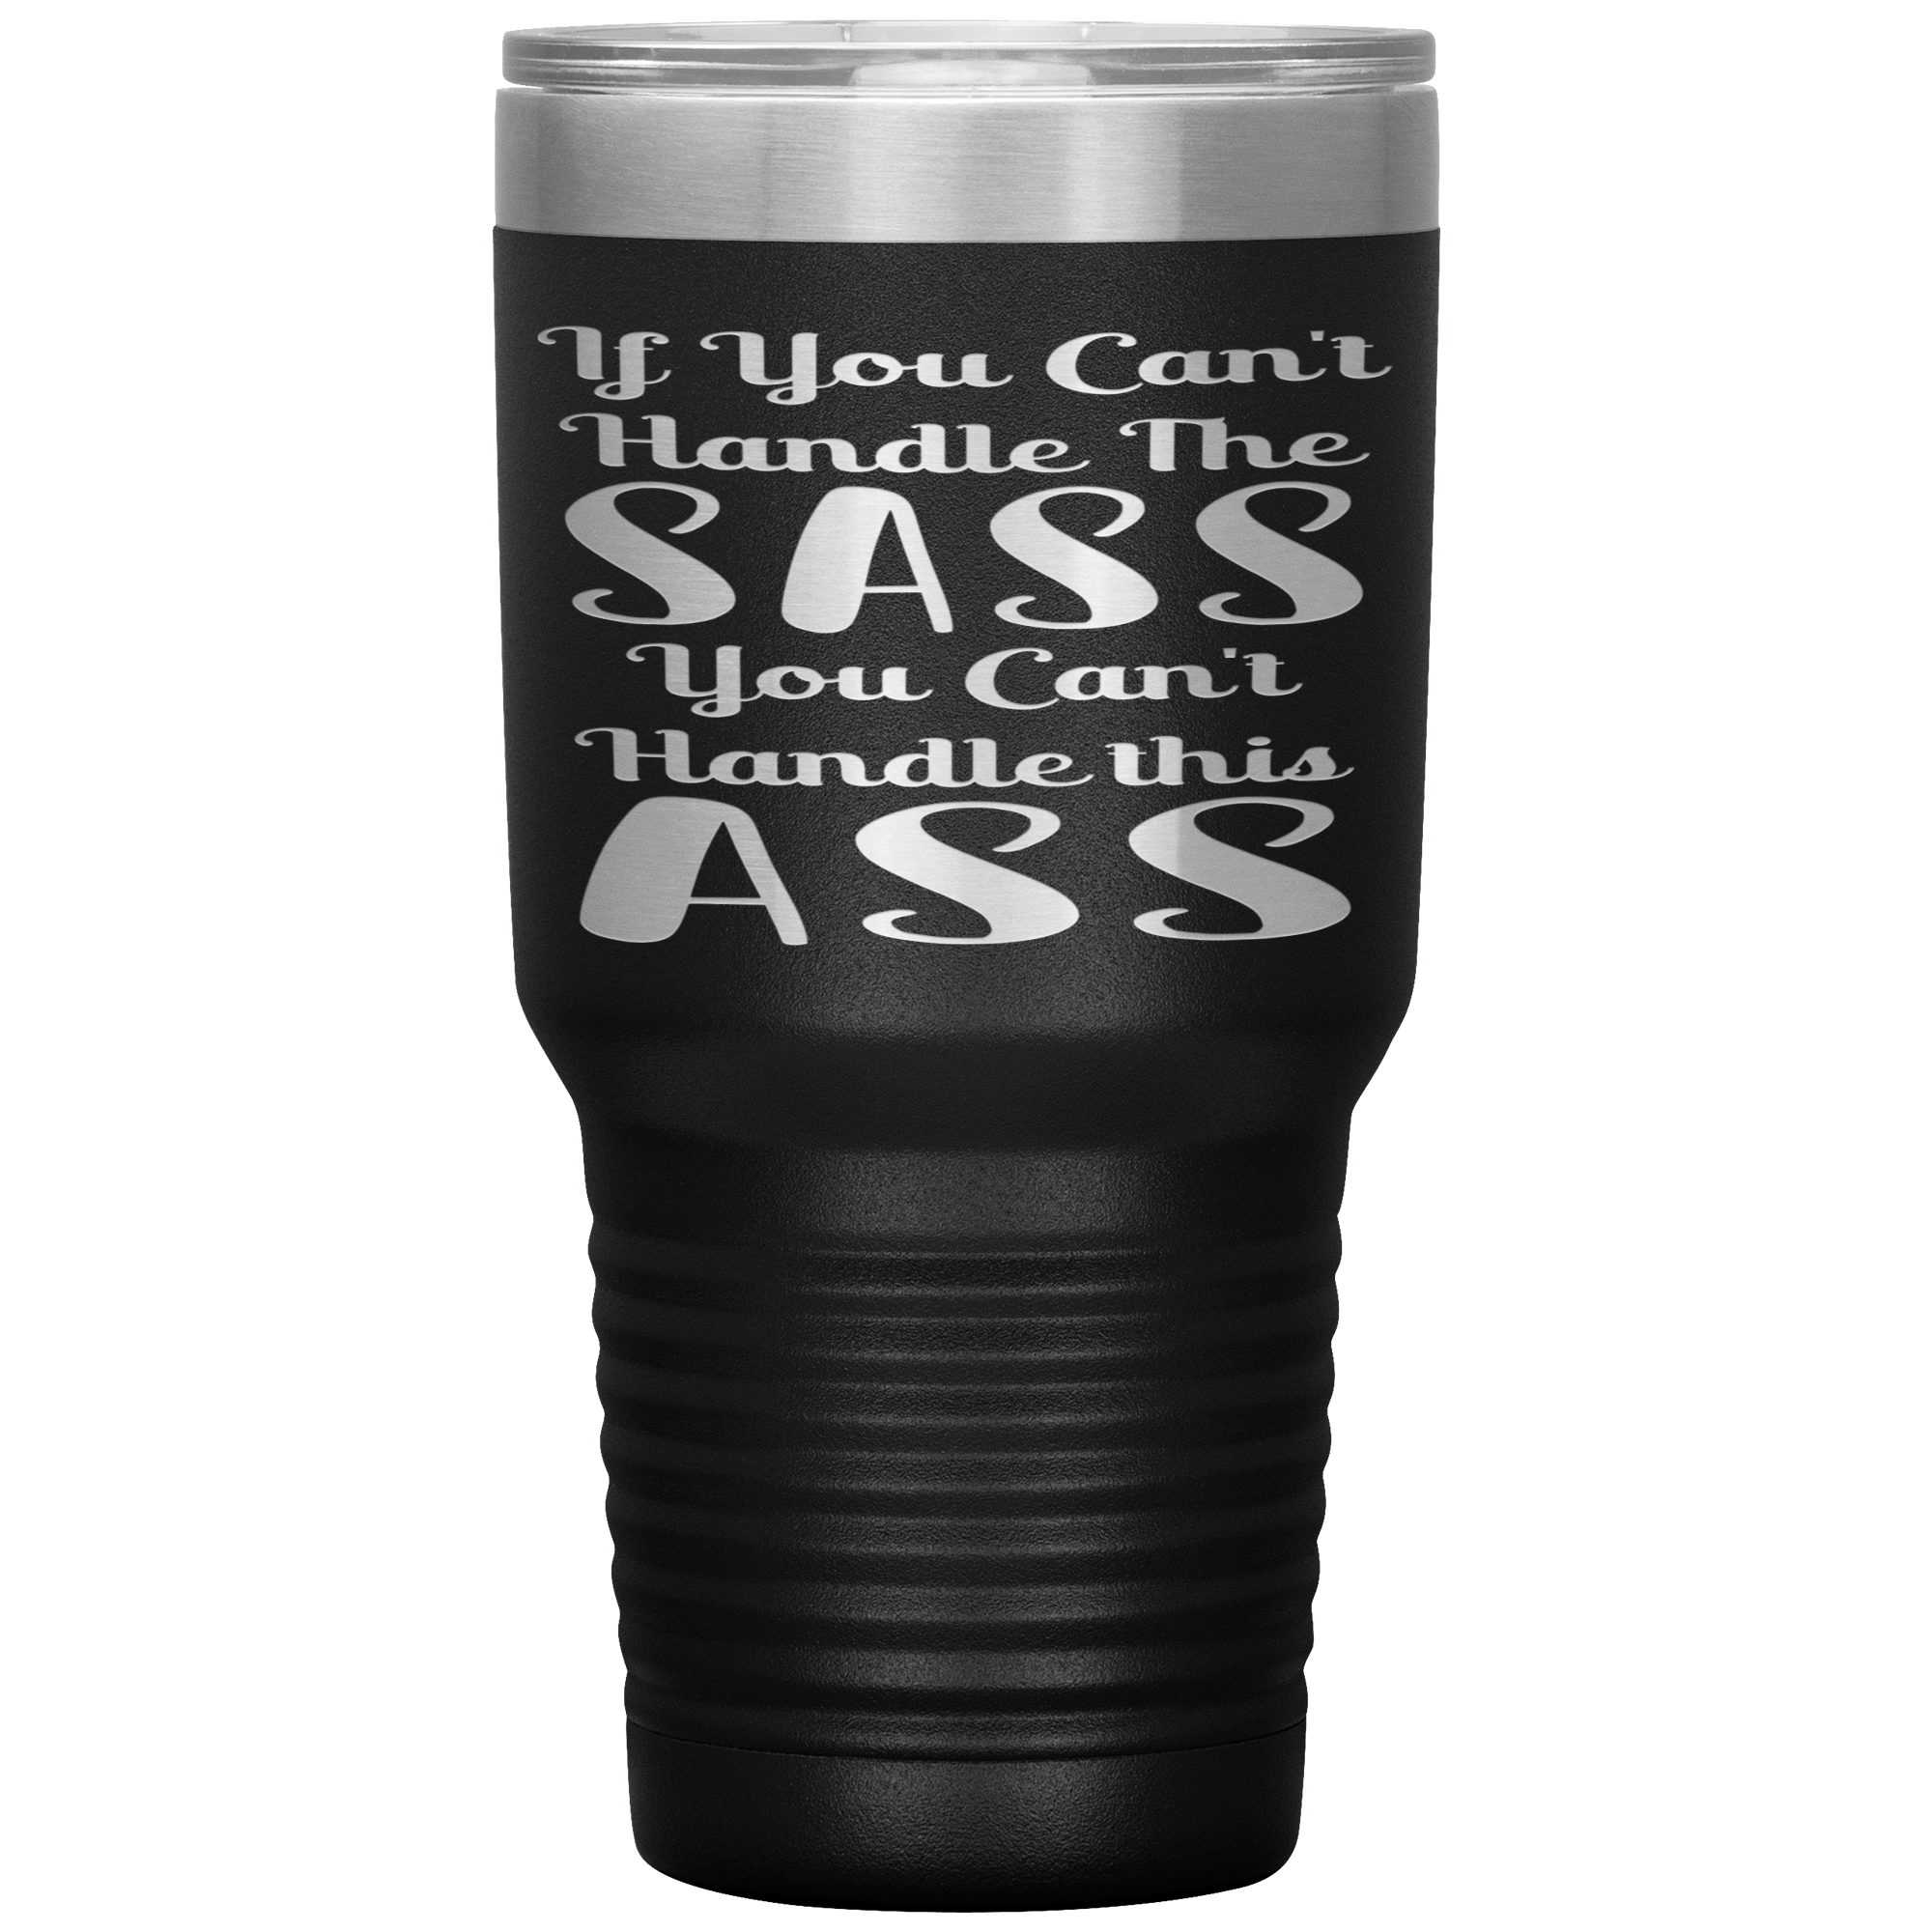 " IF YOU CAN'T HANDLE THE SASS YOU CAN'T HANDLE THIS  ASS " TUMBLER